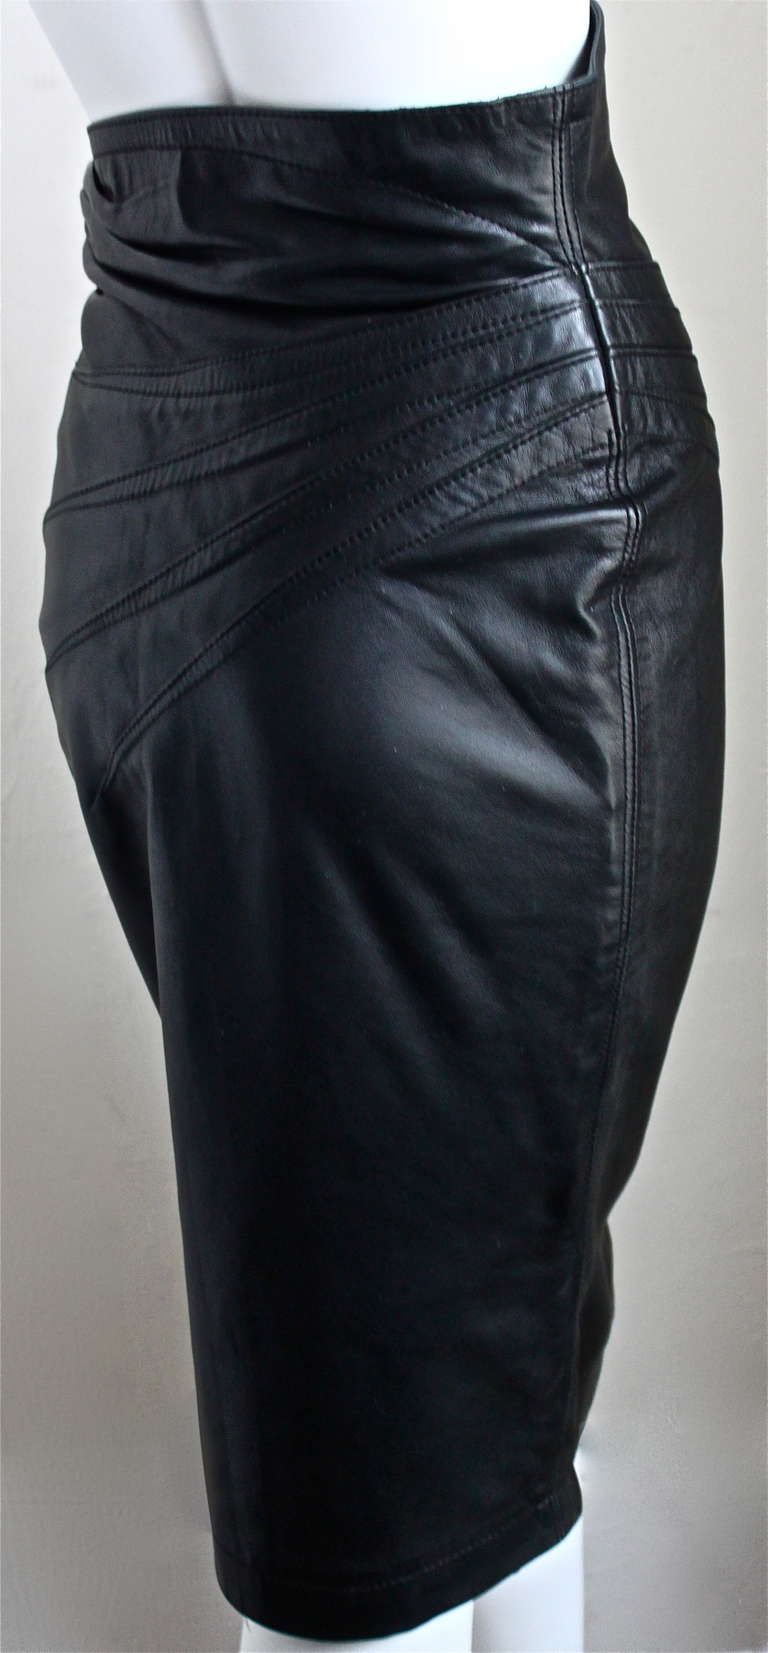 Women's 1990's AZZEDINE ALAIA black leather skirt with side buckle